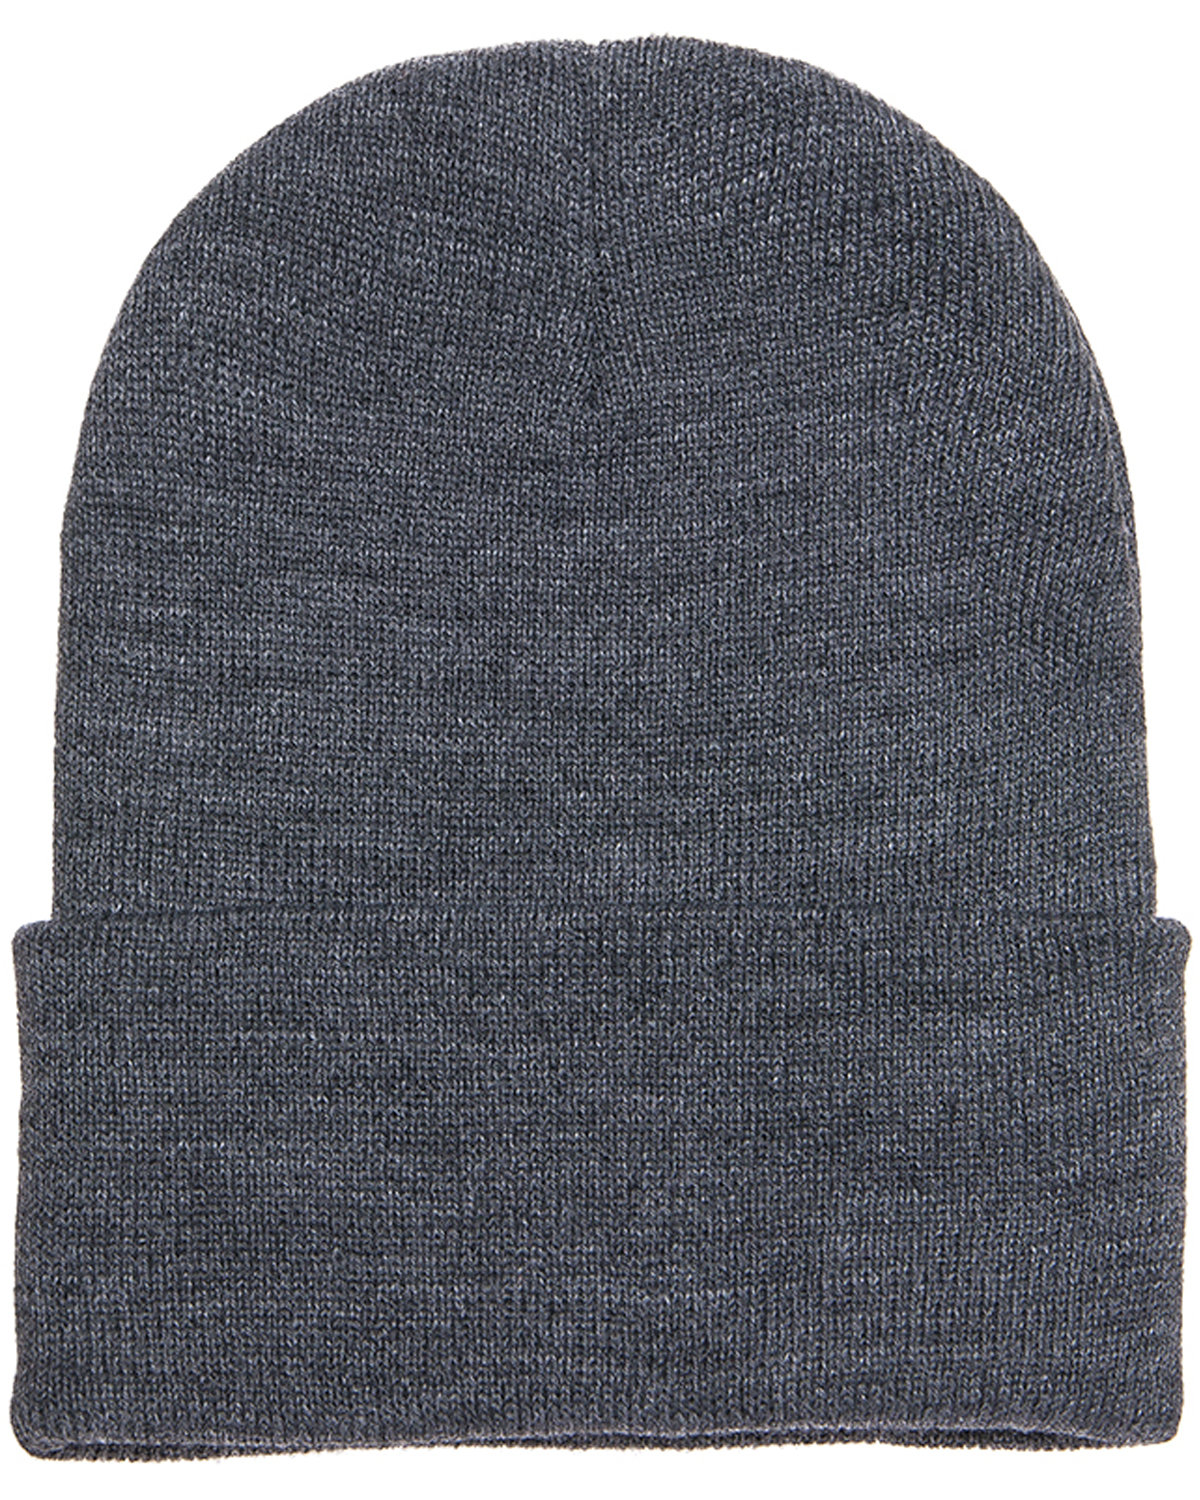 Yupoong Adult Cuffed Knit alphabroder | Beanie